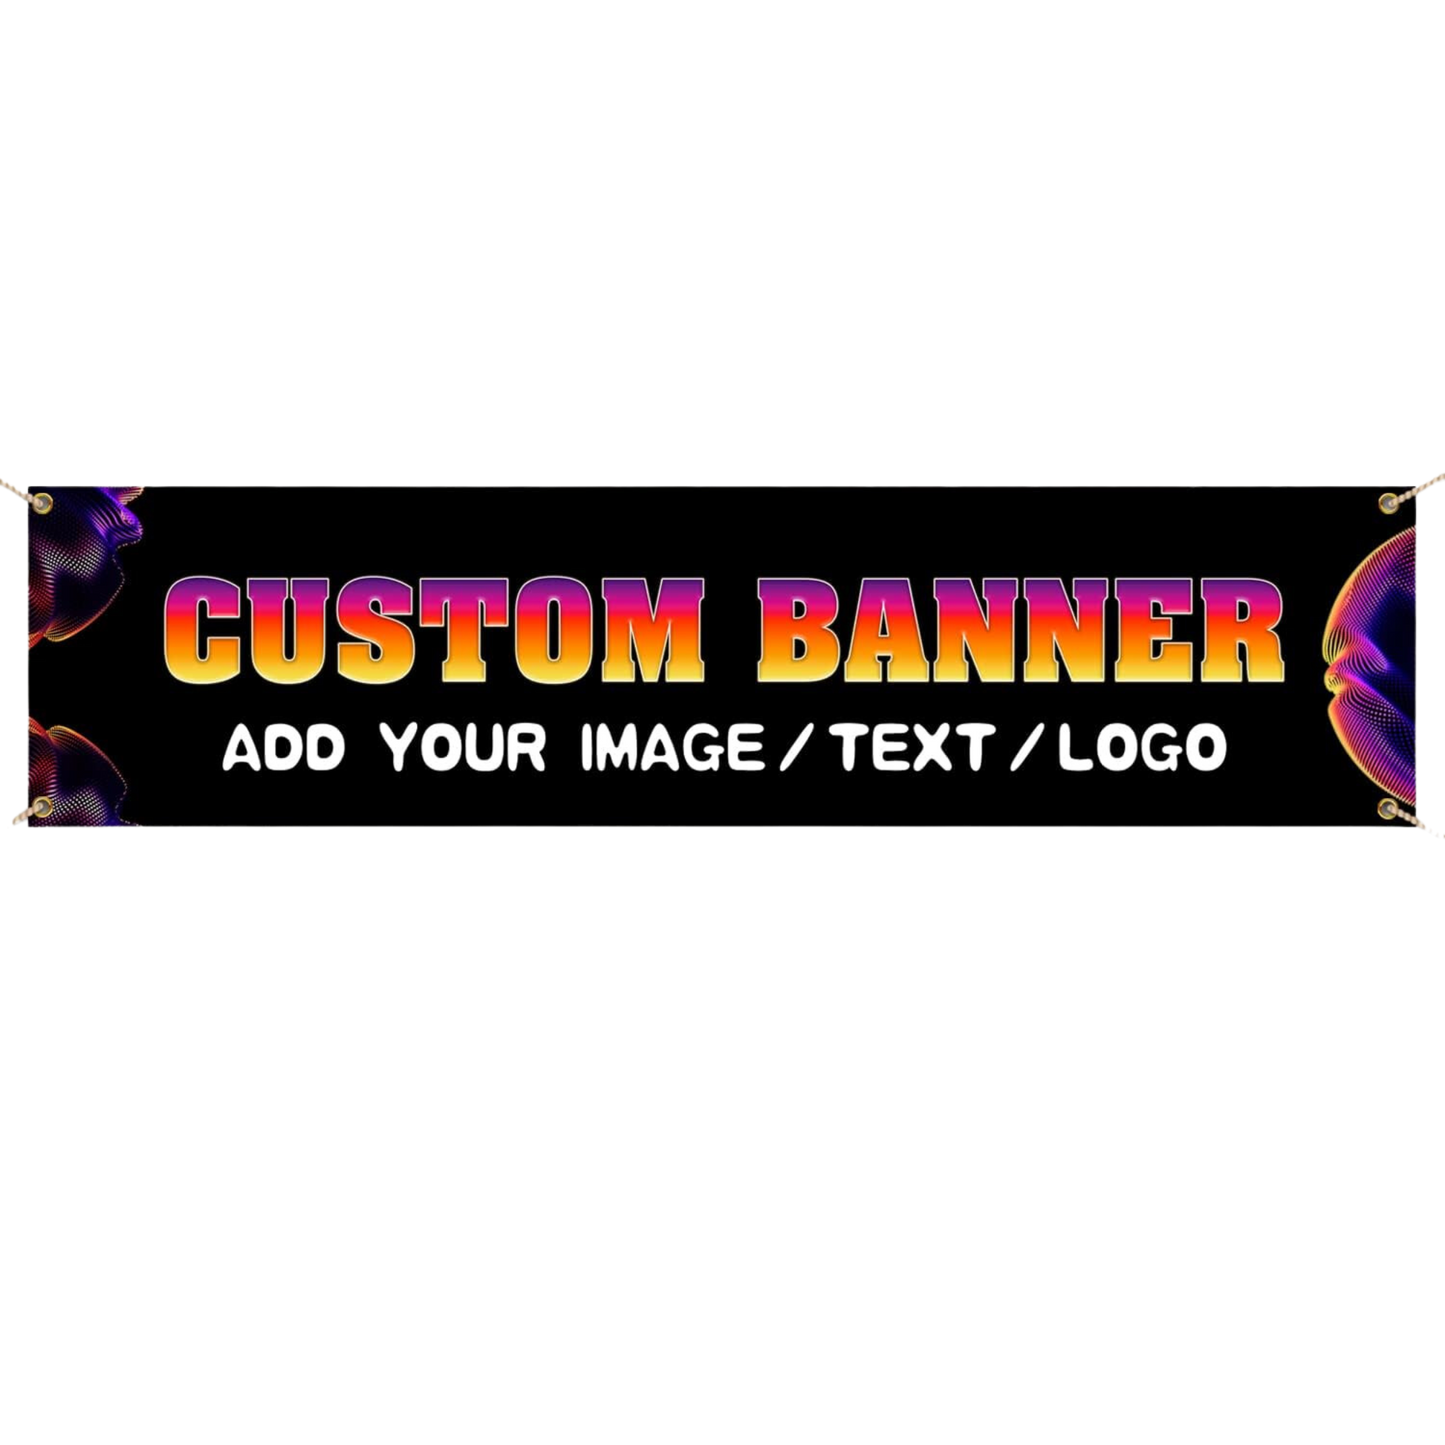 NEW!! BANNERS ALL SIZES AVAILABLE